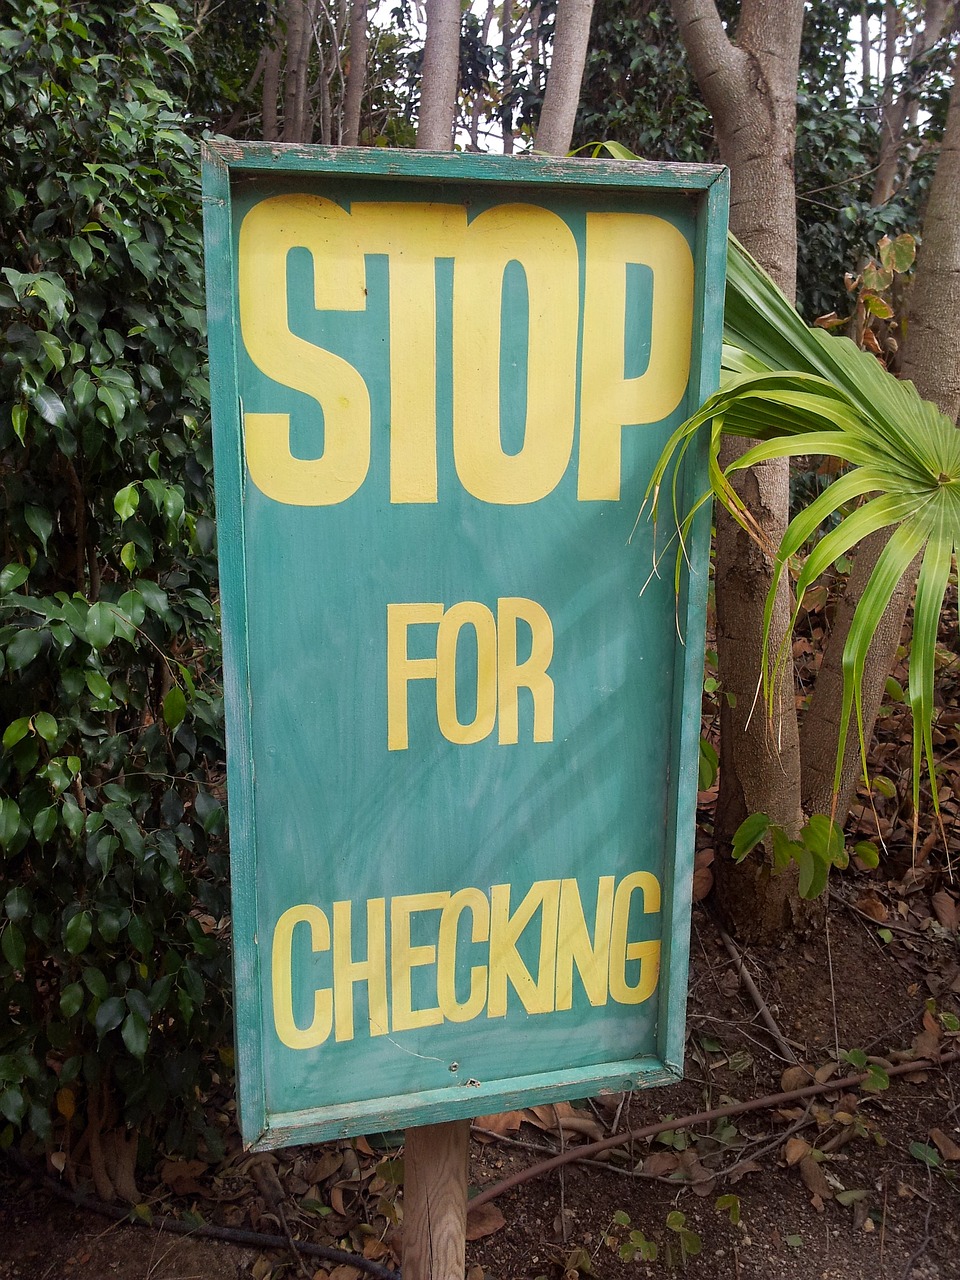 Sign,board,zoo,checkpoint,hiking free image from